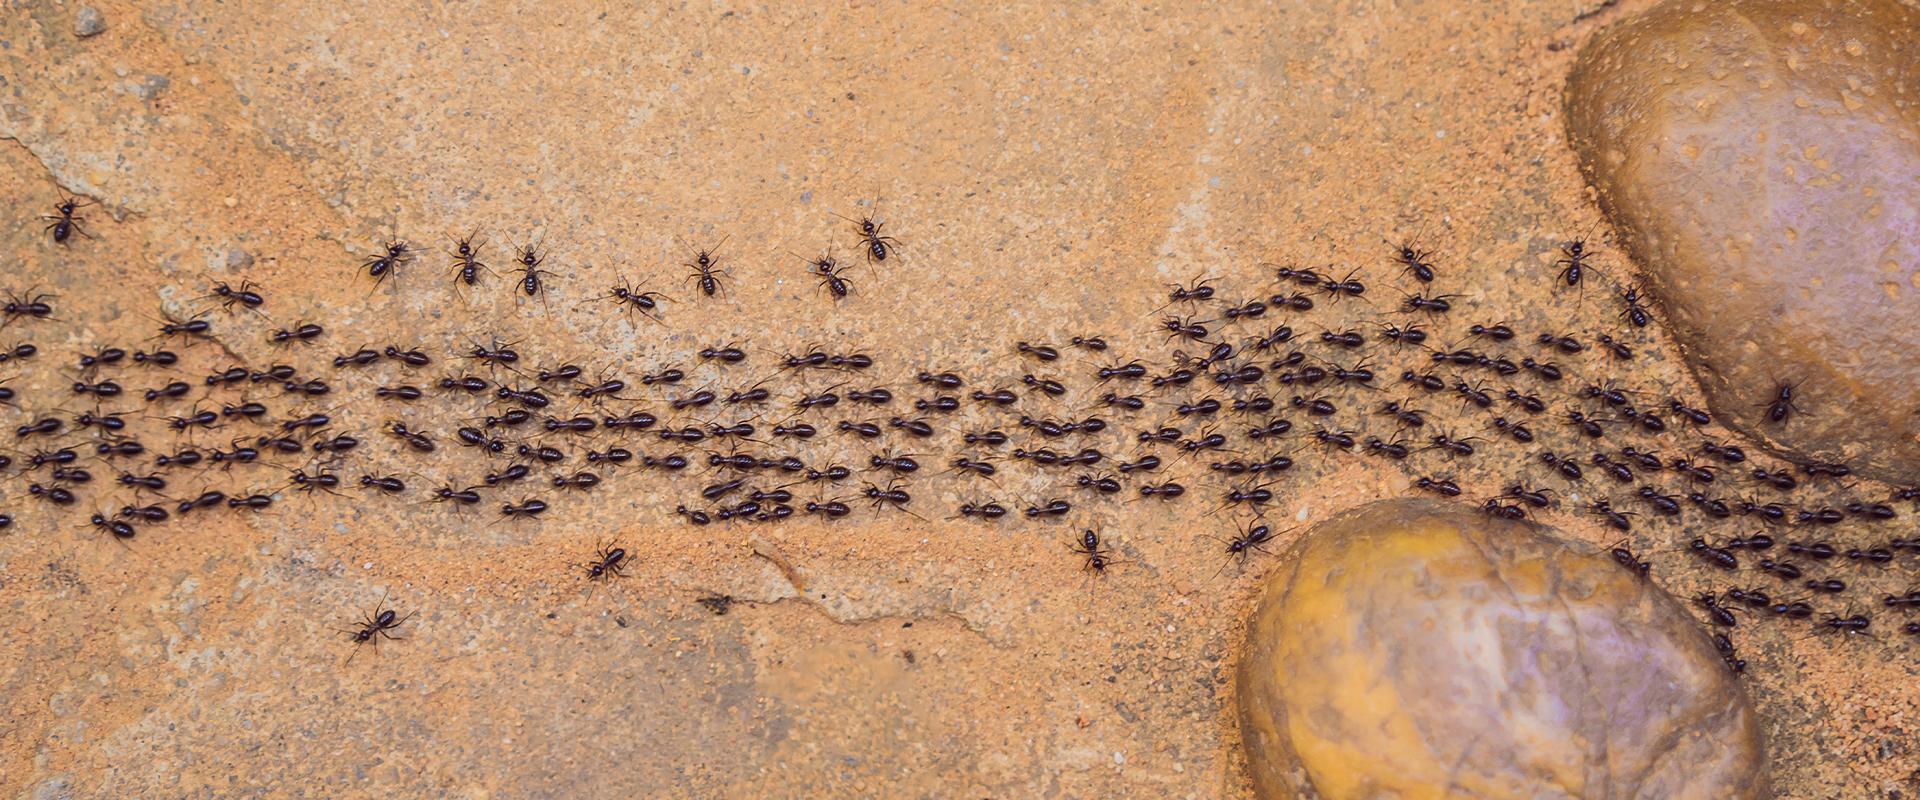 ants marching on the dirt